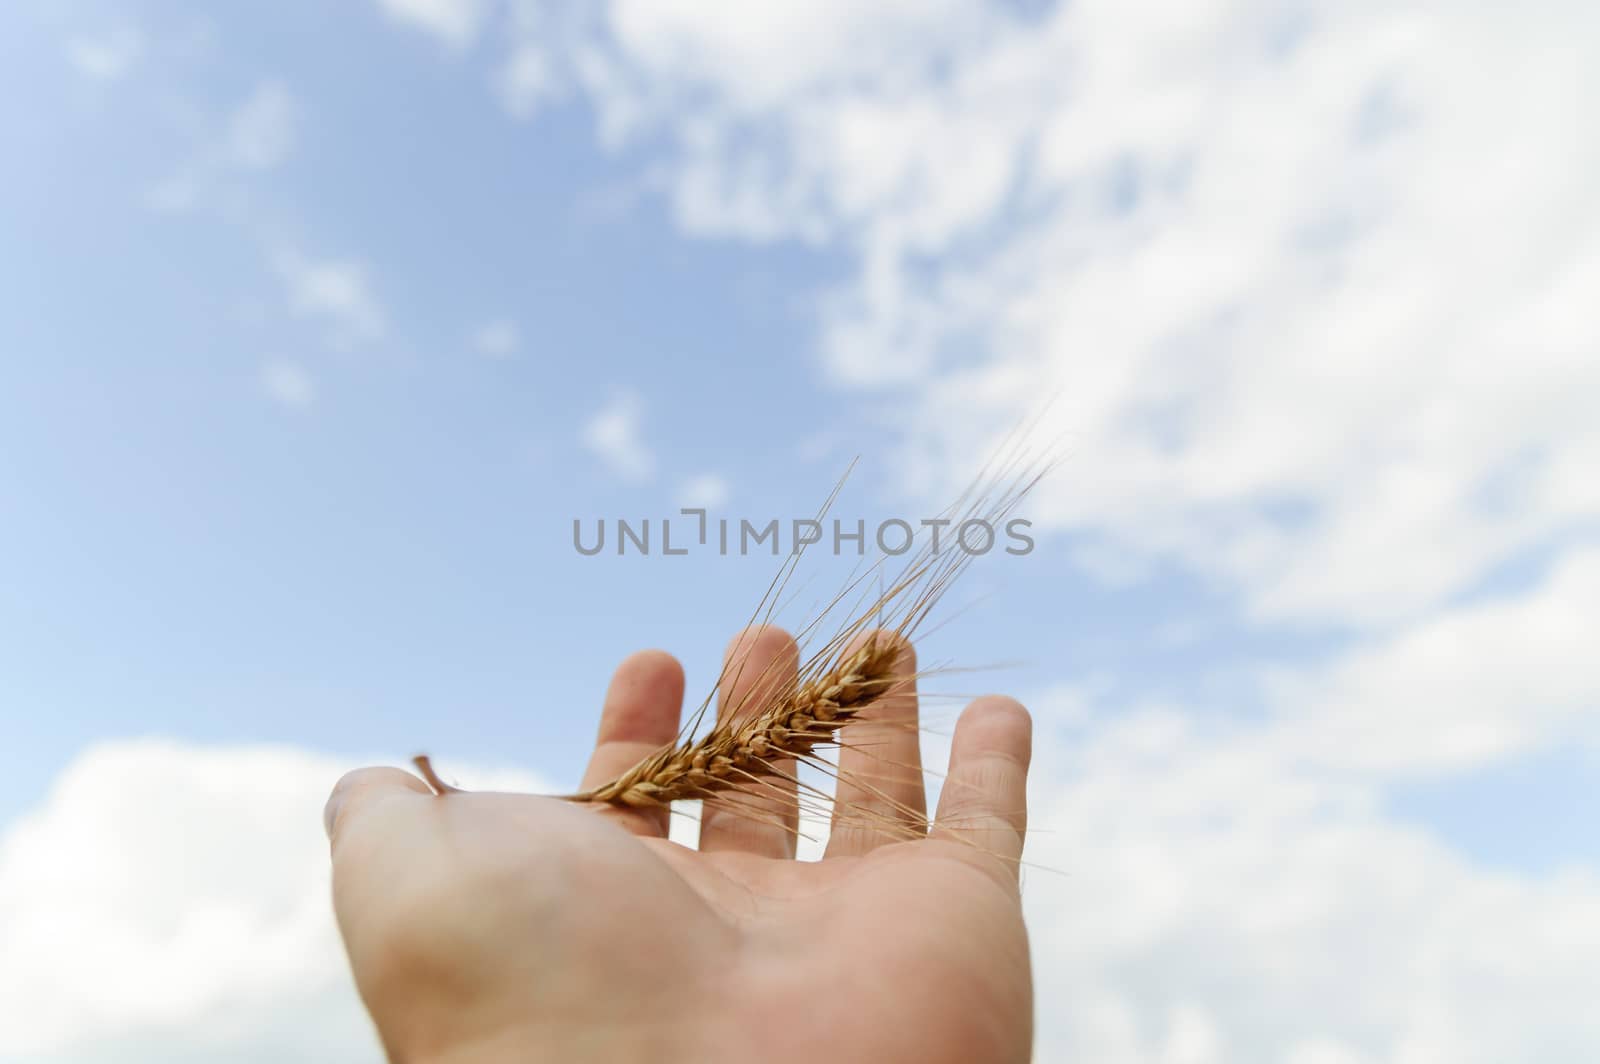 wheat on hand and blue sky, nature series